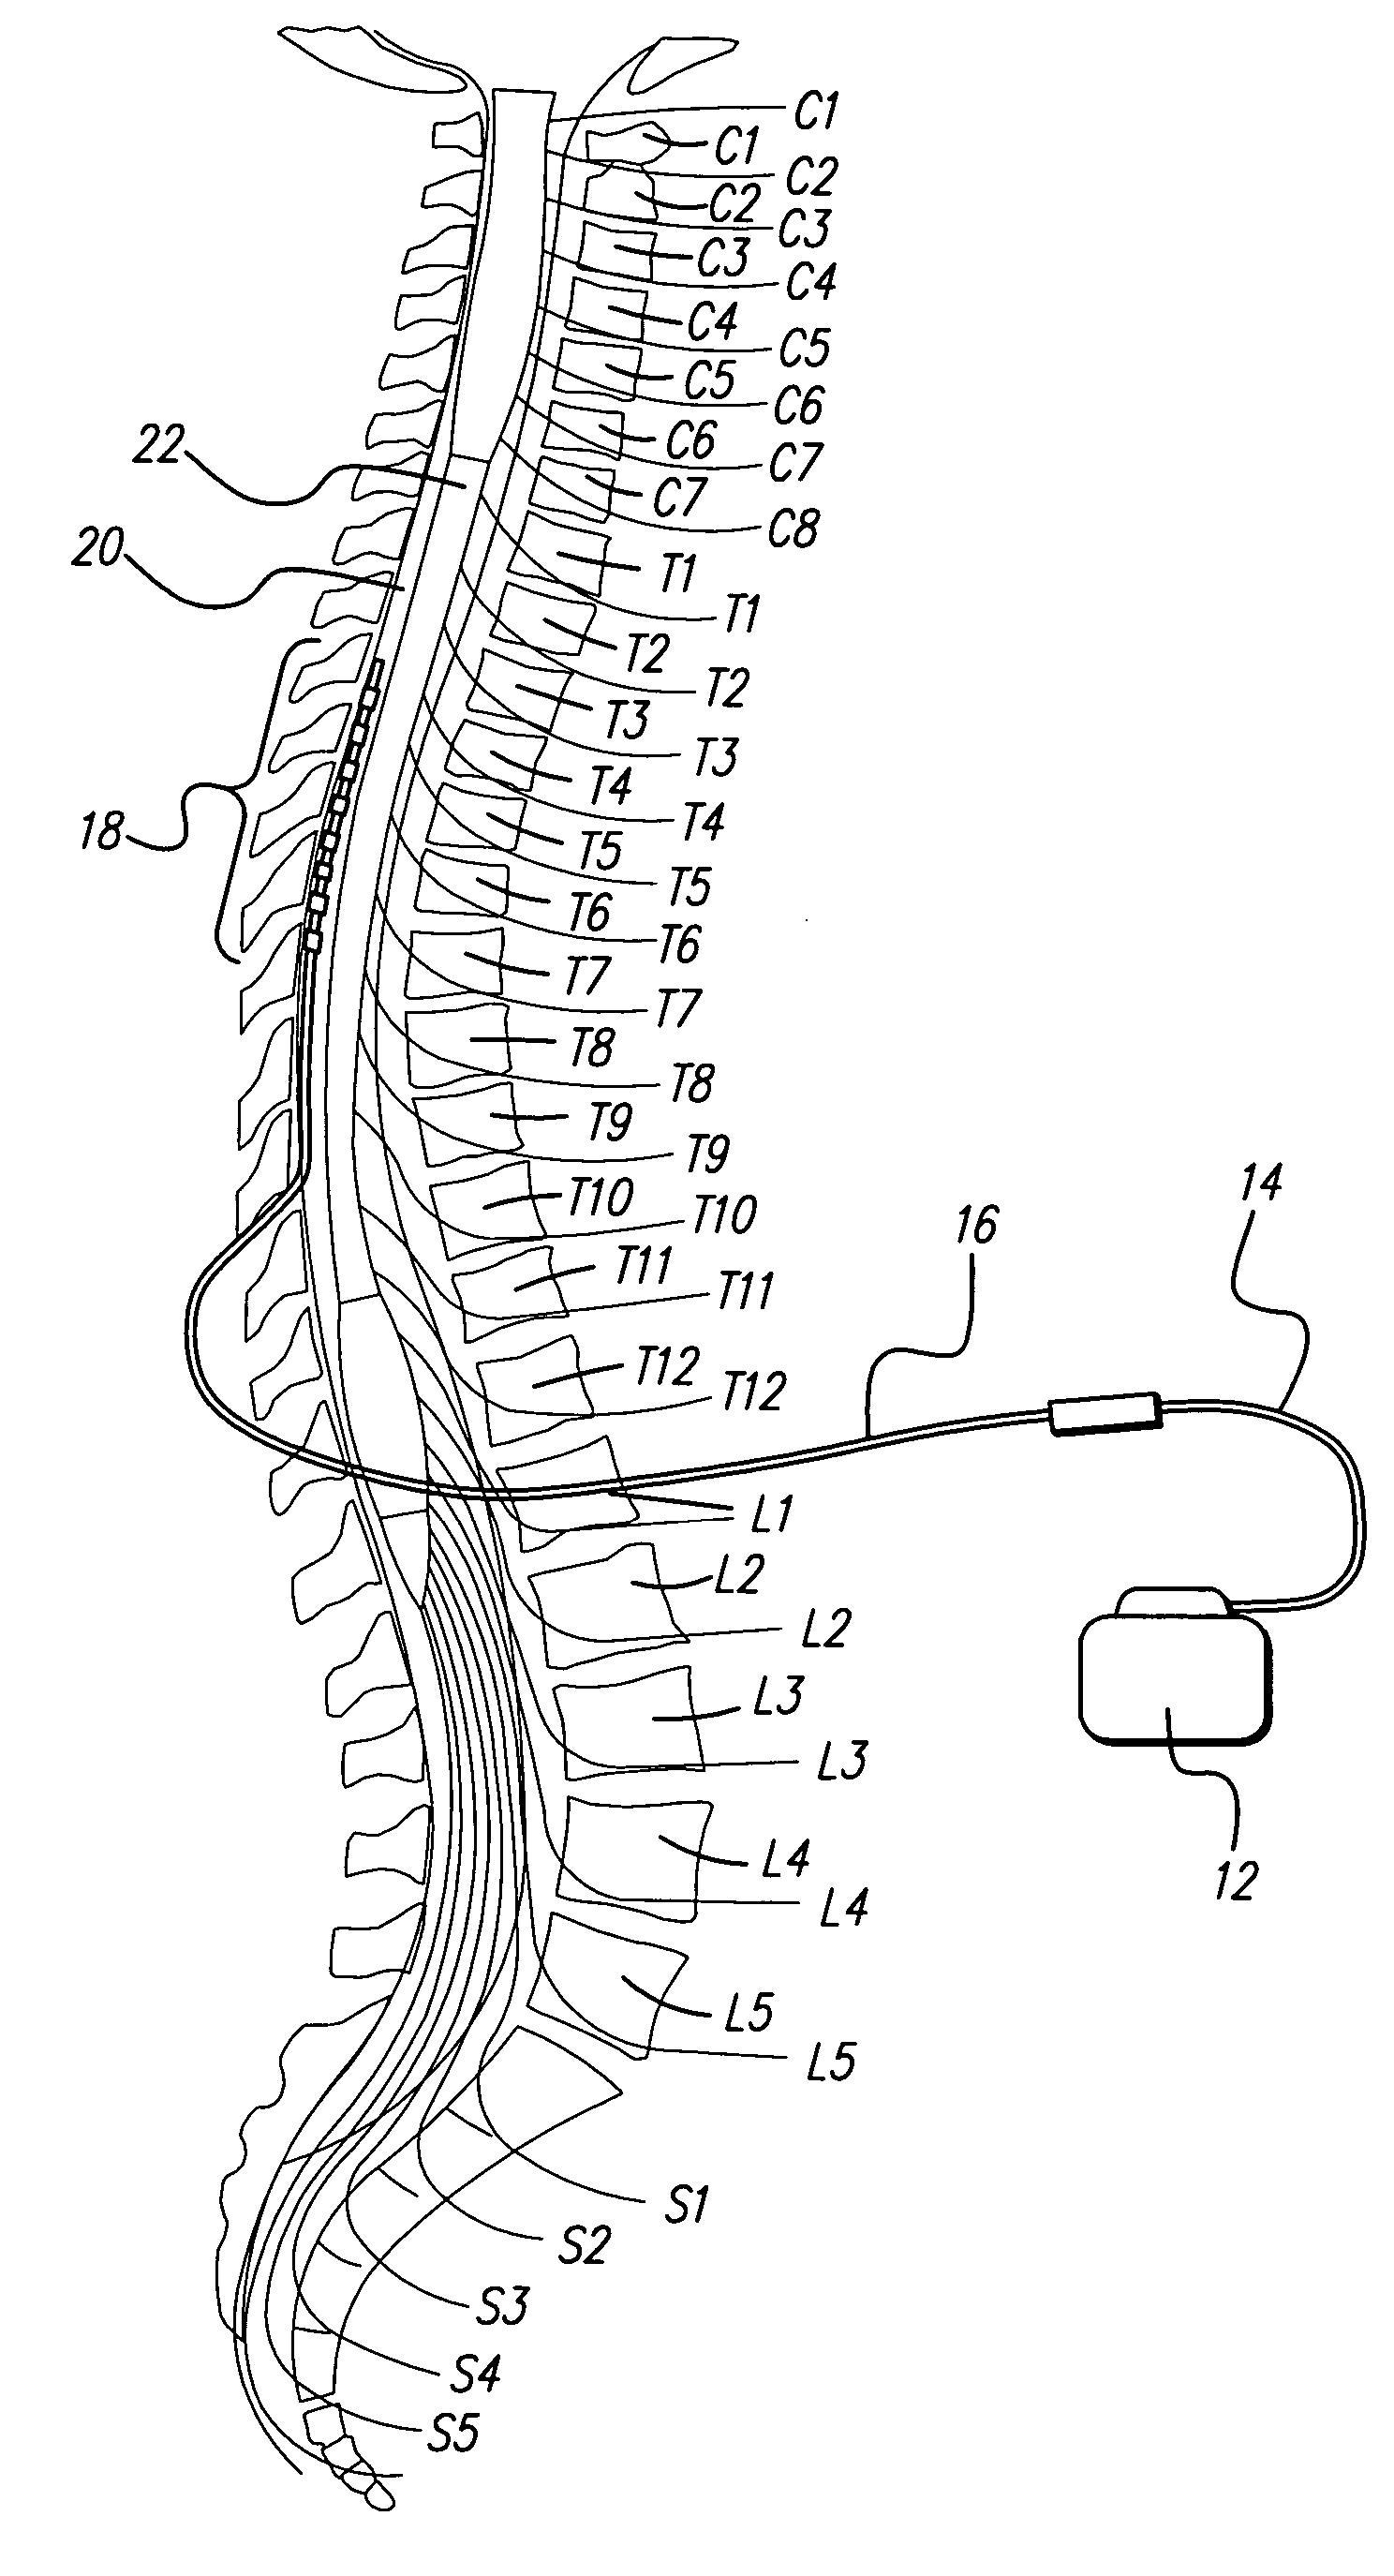 Method for optimizing location of implanted electrode array during implant surgery